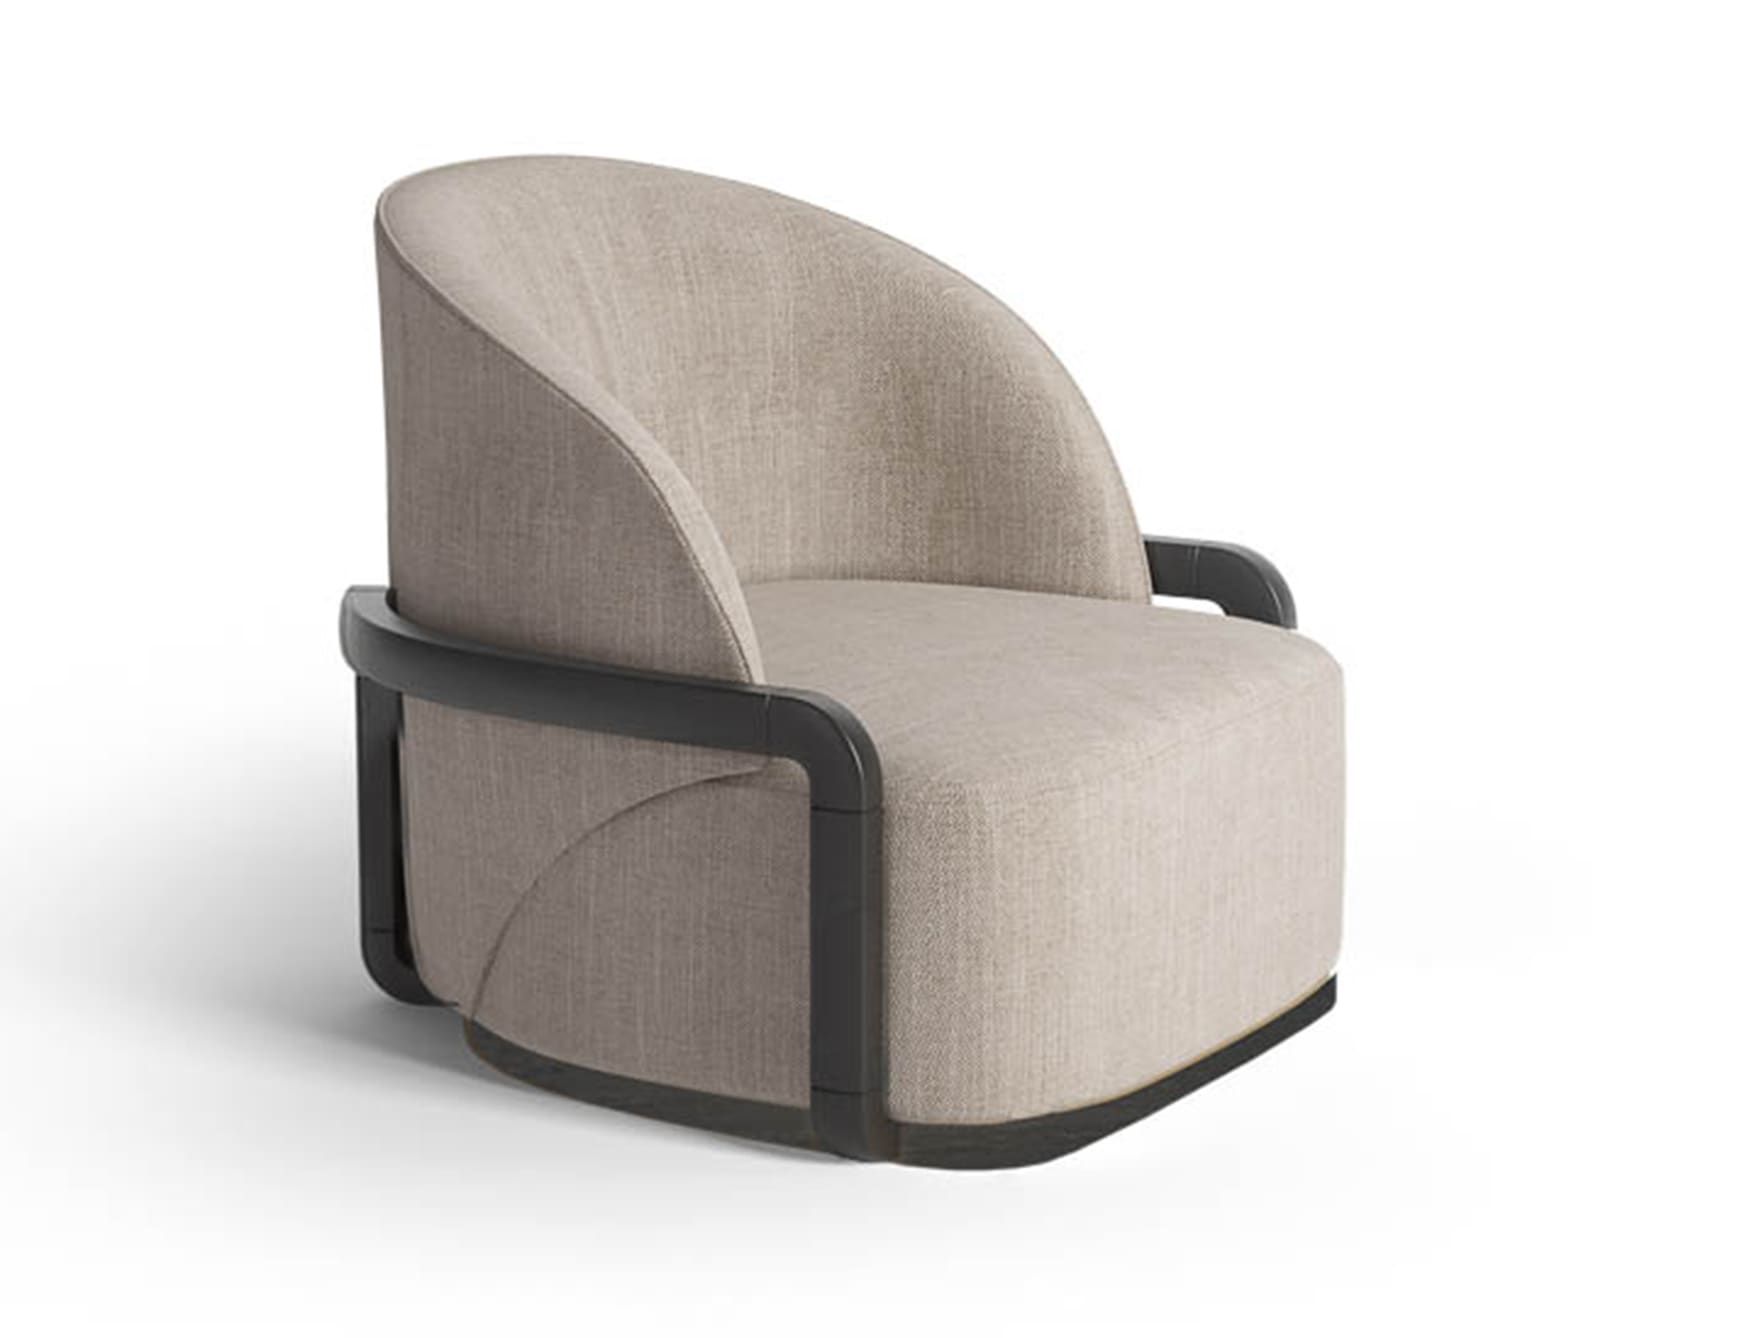 Lady Peacock modern luxury sofa chair with beige leather